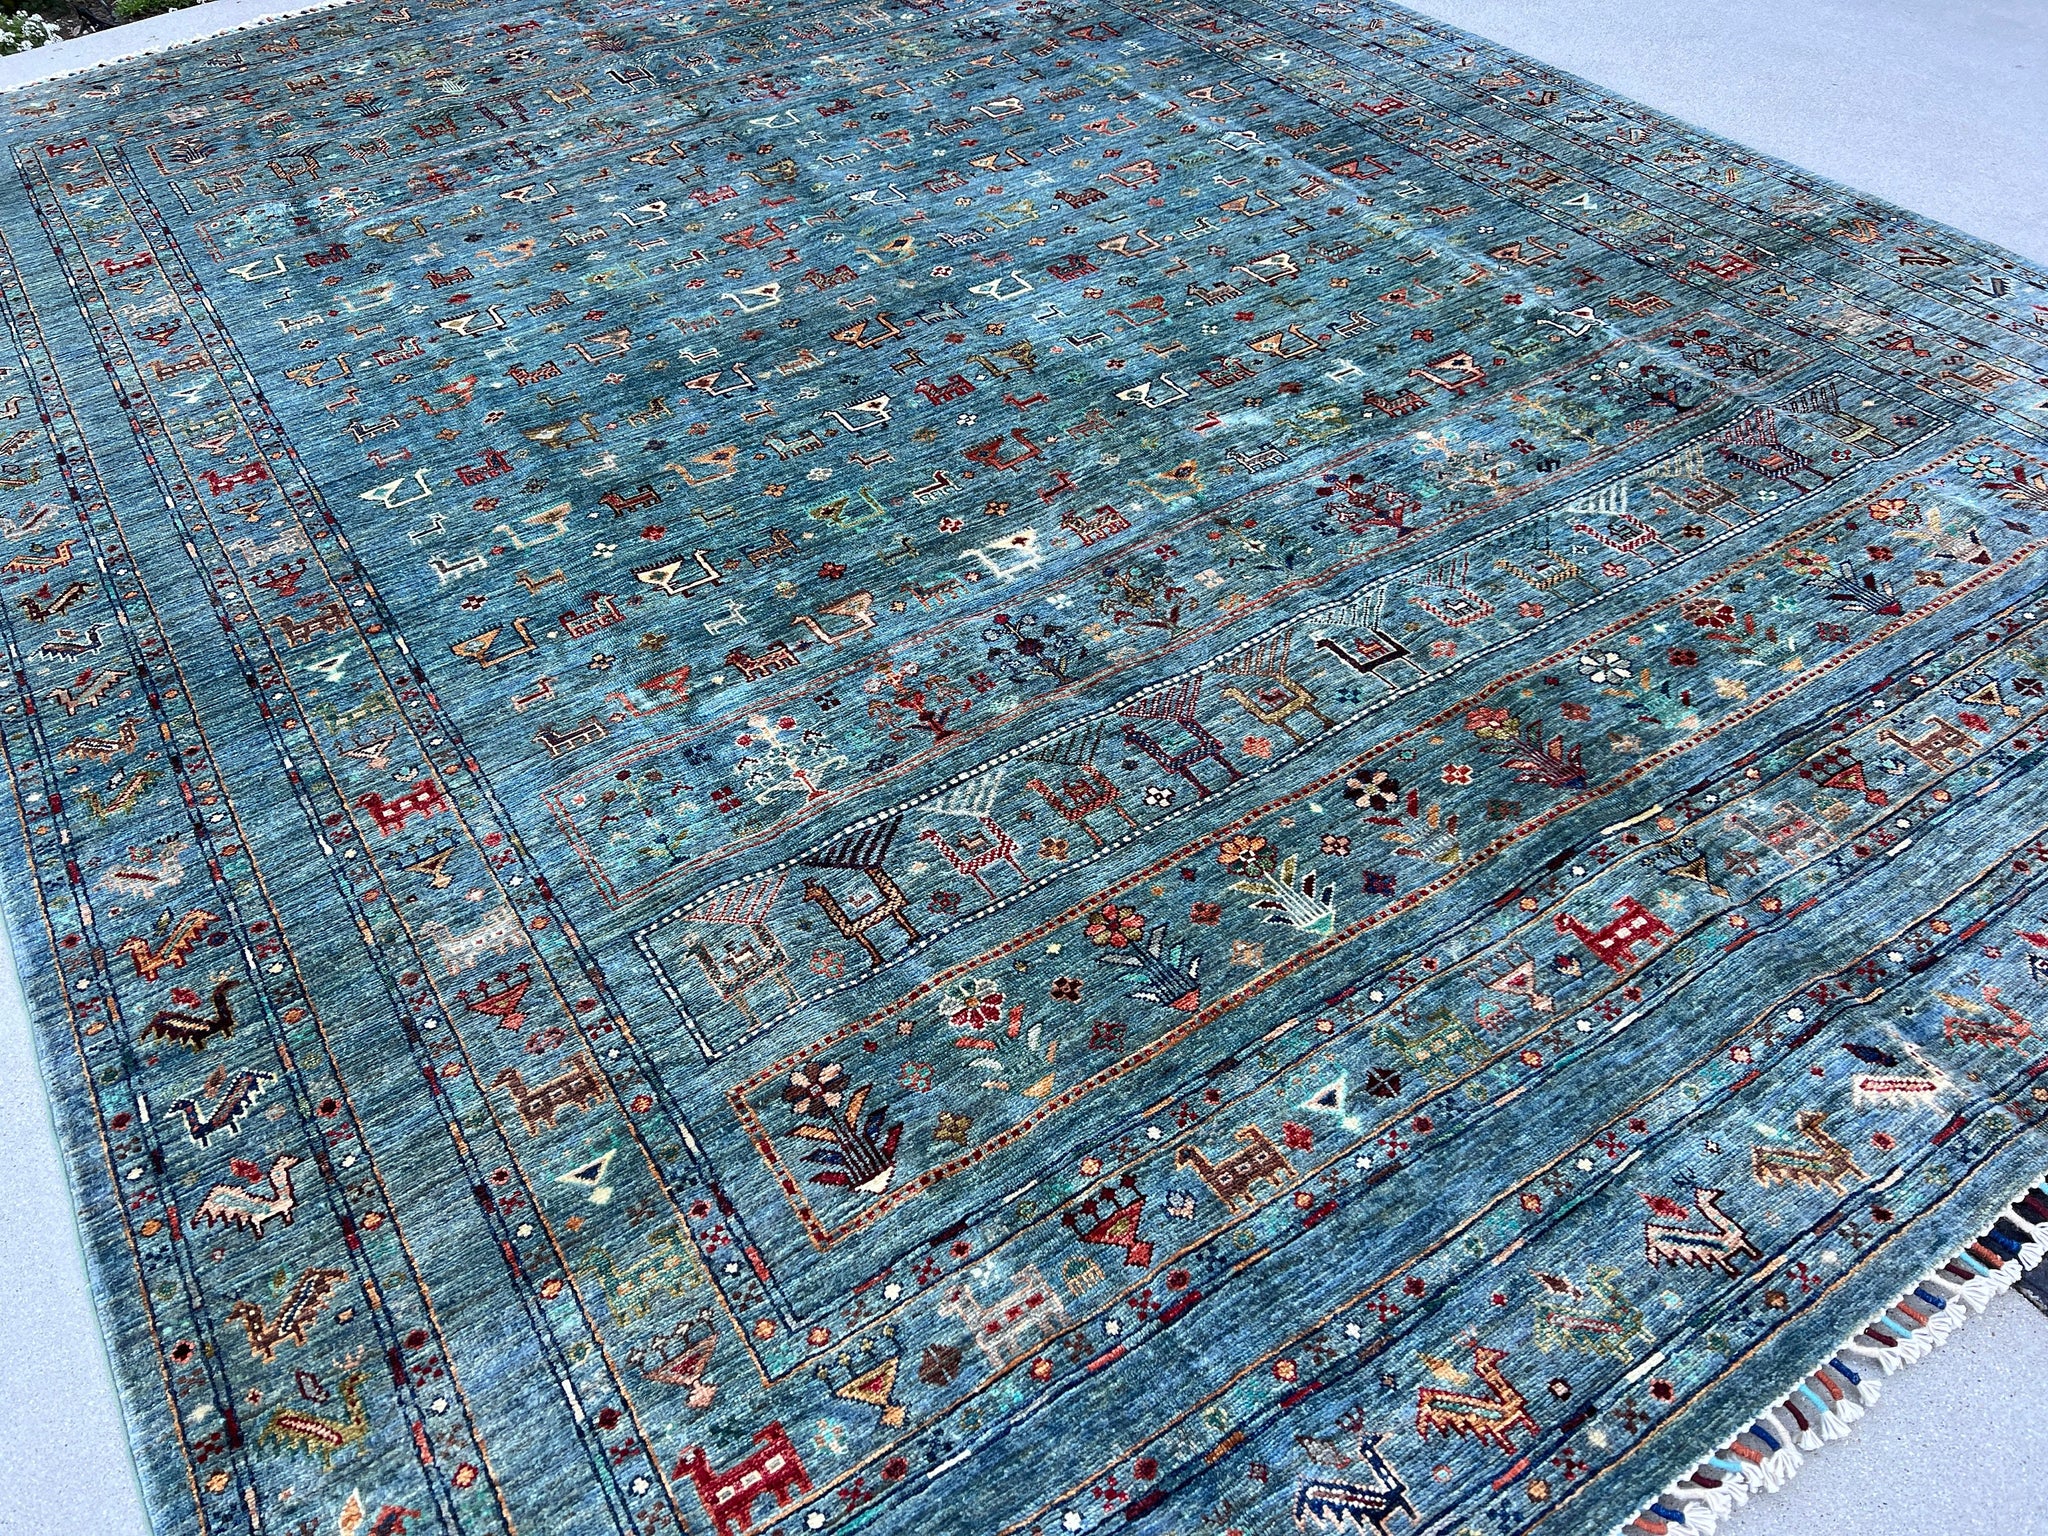 8x11 Handmade Afghan Rug | Blue Green Teal Turquoise Red Orange Ivory White Brown | Tribal Floral Wool Boho Hand Knotted Bohemian Persian